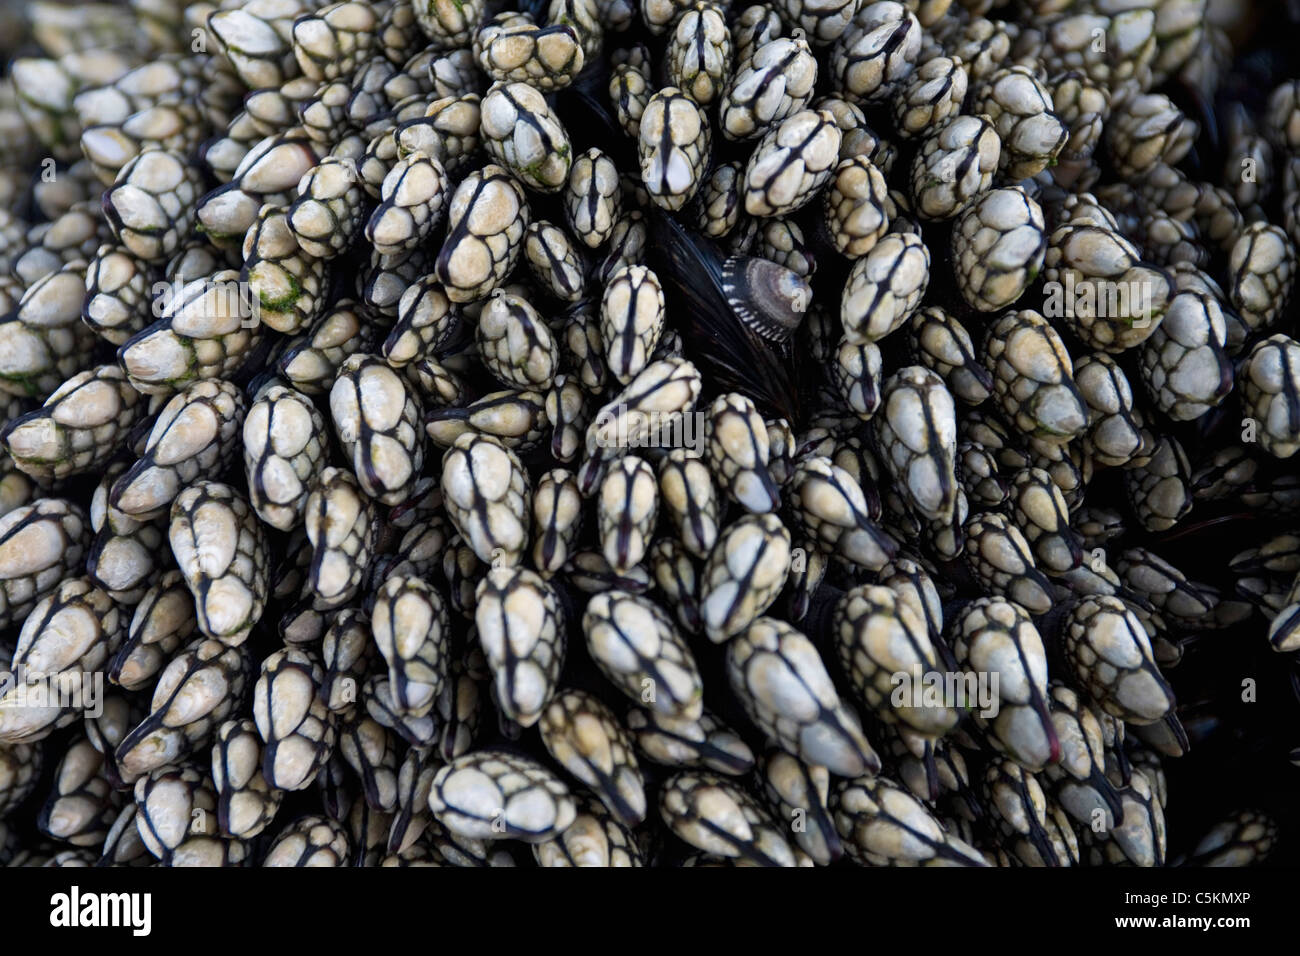 Mussel, limpet and other sessile creatures, Huntington Beach, CA Stock Photo